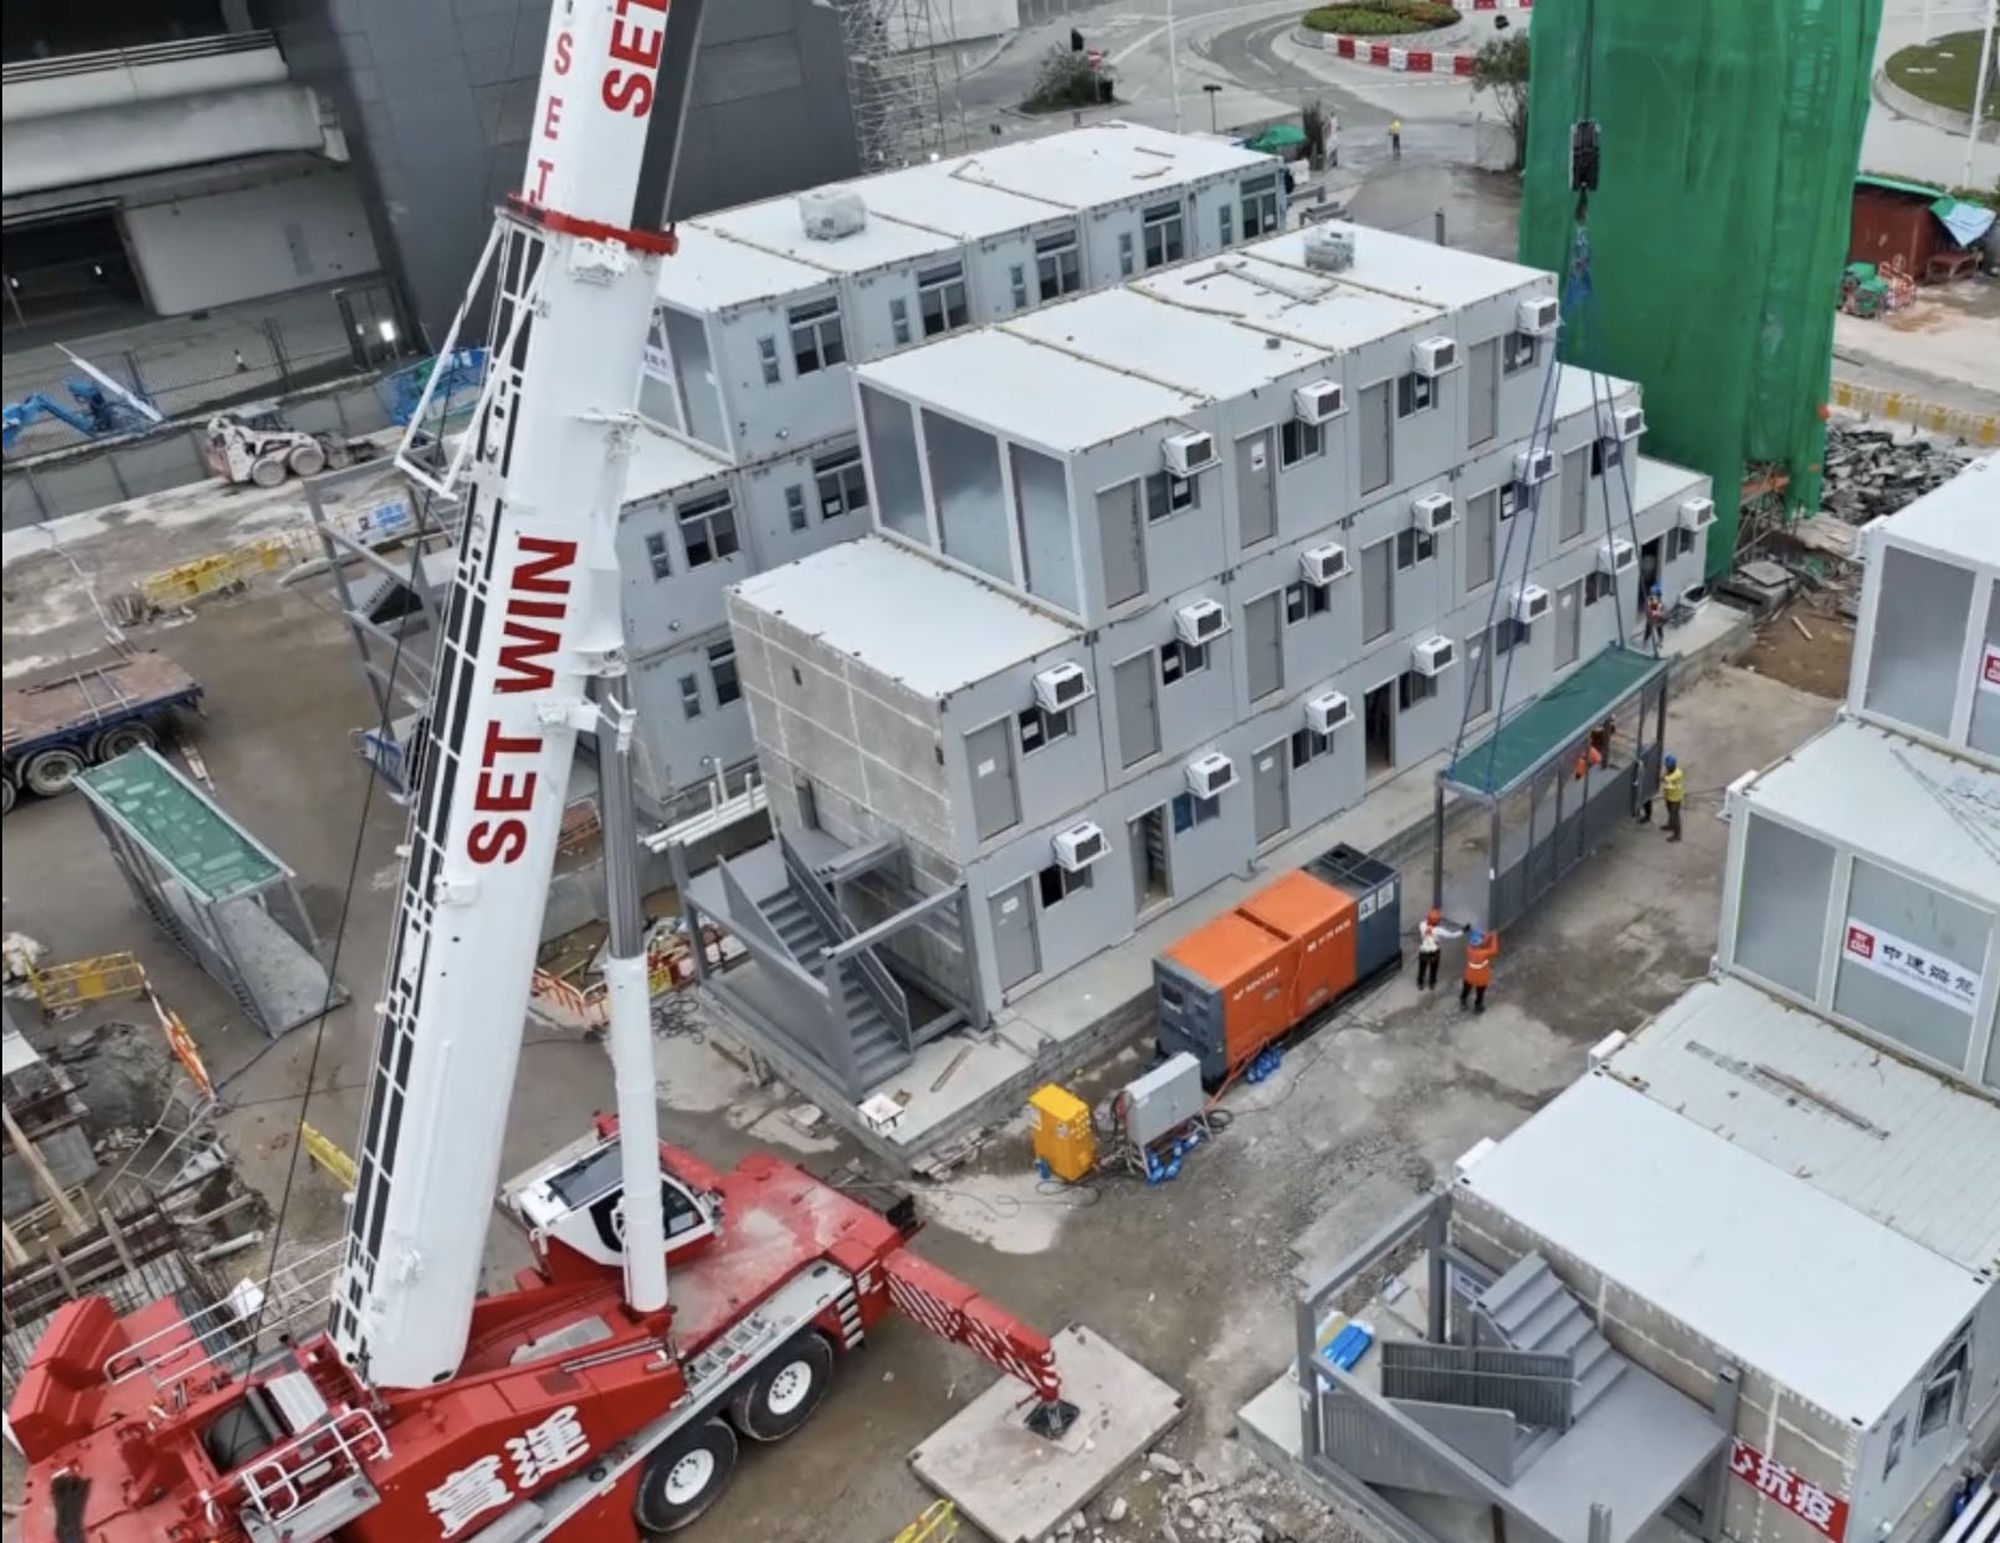 The CIF at Kai Tak is built with Modular Integrated Construction (MiC), where prefabricated modules are completed in the factory and then transported to the construction site for assembly and for connection to the water, electricity and sewage systems, effectively reducing construction time.